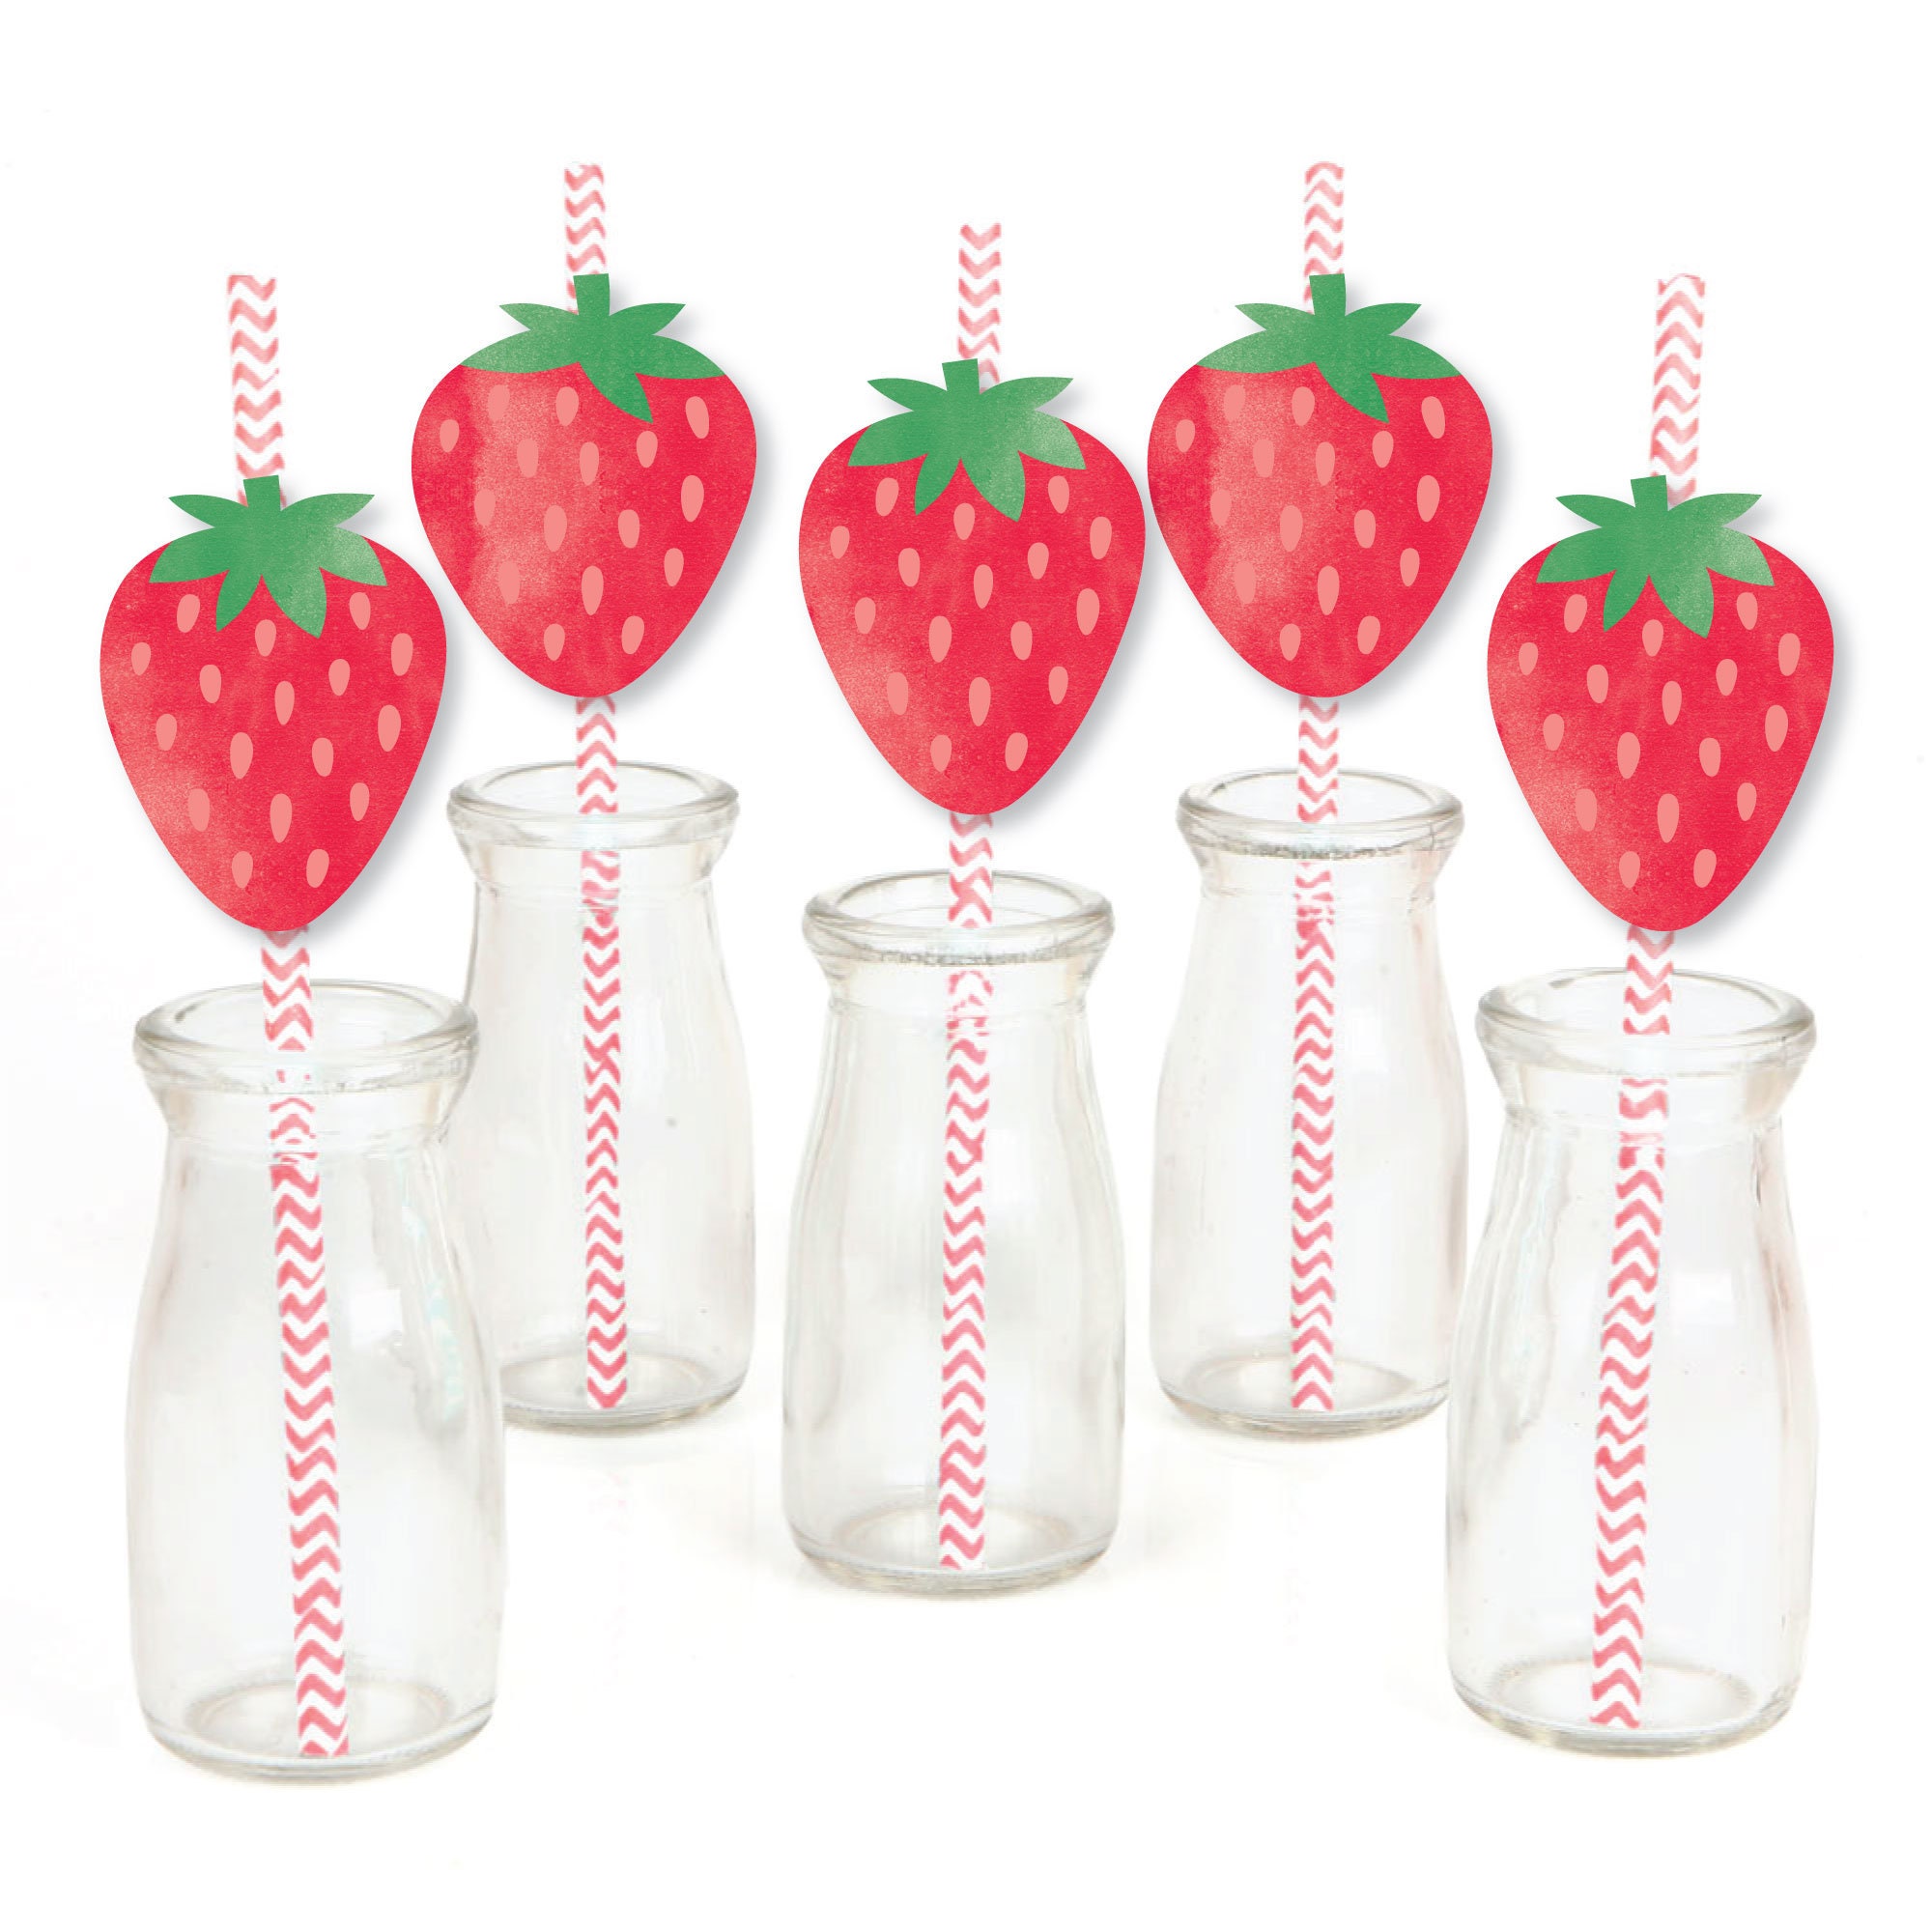 Big Dot of Happiness Berry First Birthday - Sweet Strawberry - Fruit 1st Birthday Party Centerpiece Sticks - Table Toppers - Set of 15, Red